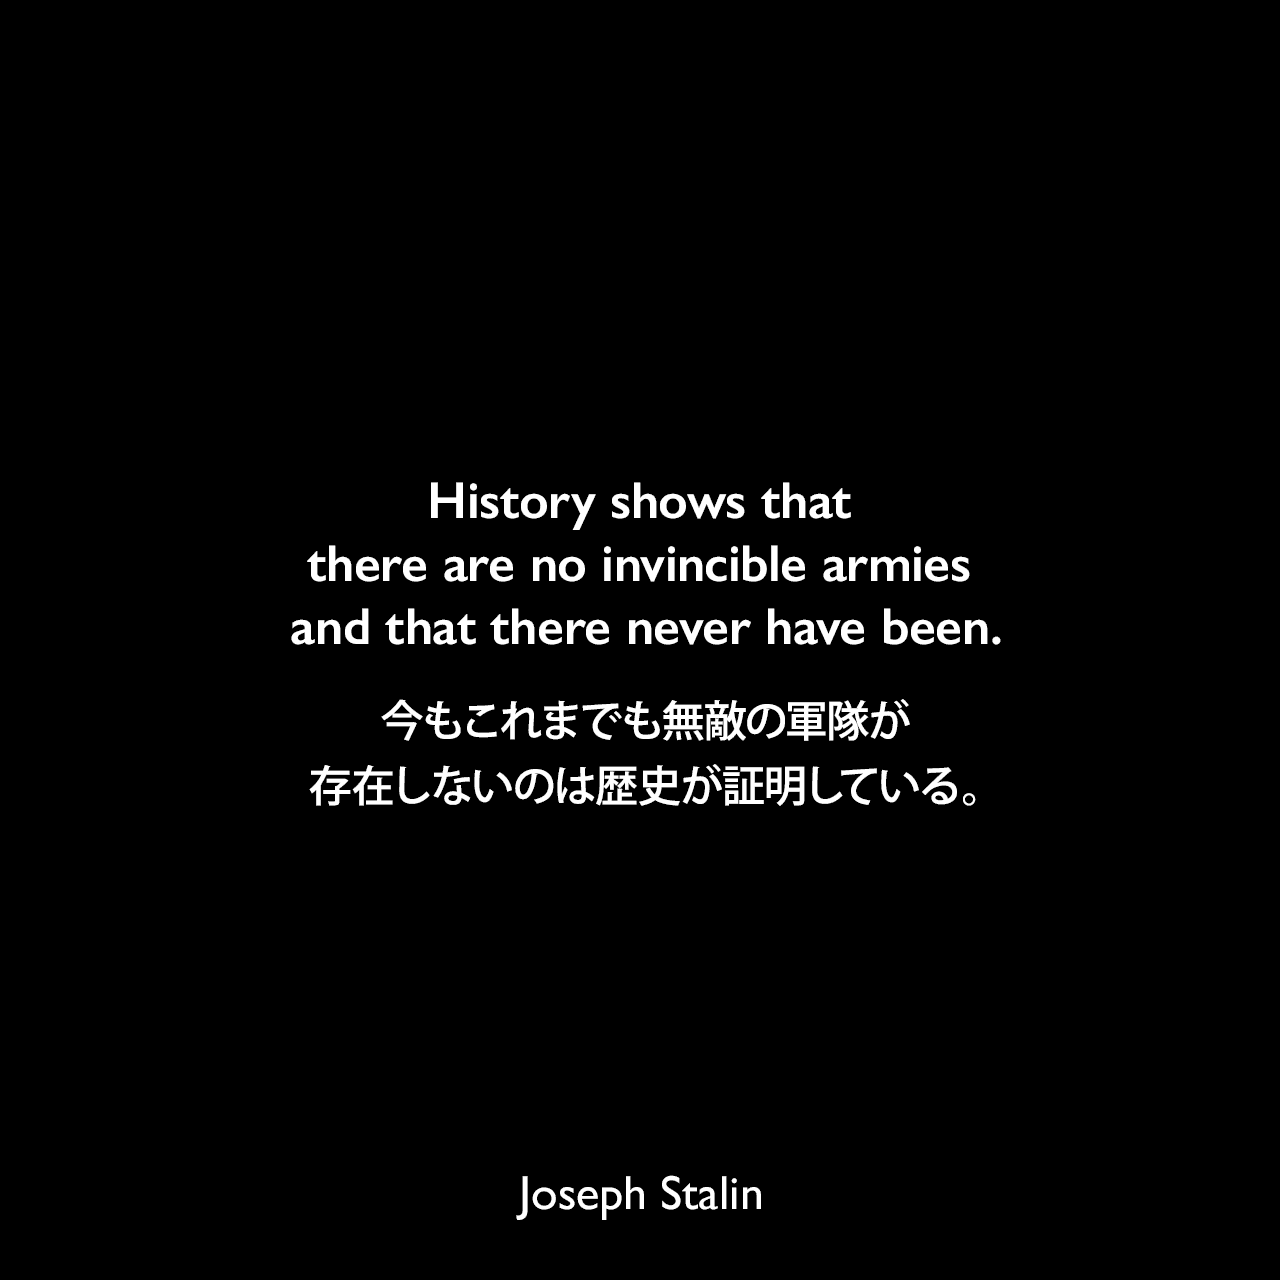 History shows that there are no invincible armies and that there never have been.今もこれまでも無敵の軍隊が存在しないのは歴史が証明している。- 1941年7月3日のラジオ演説よりJoseph Stalin